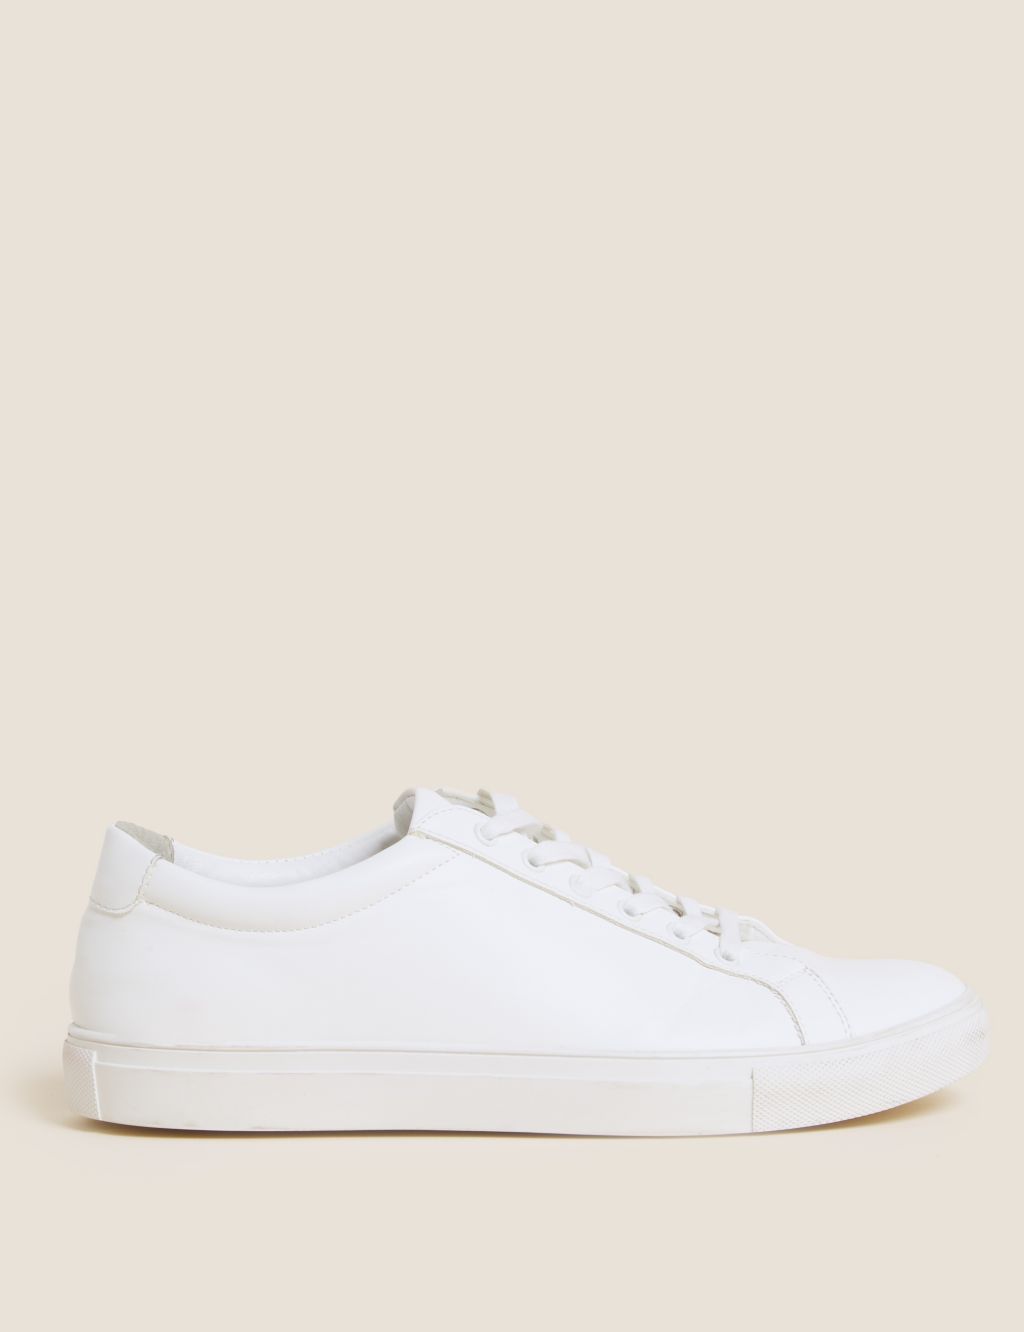 Lace-Up Trainers image 1